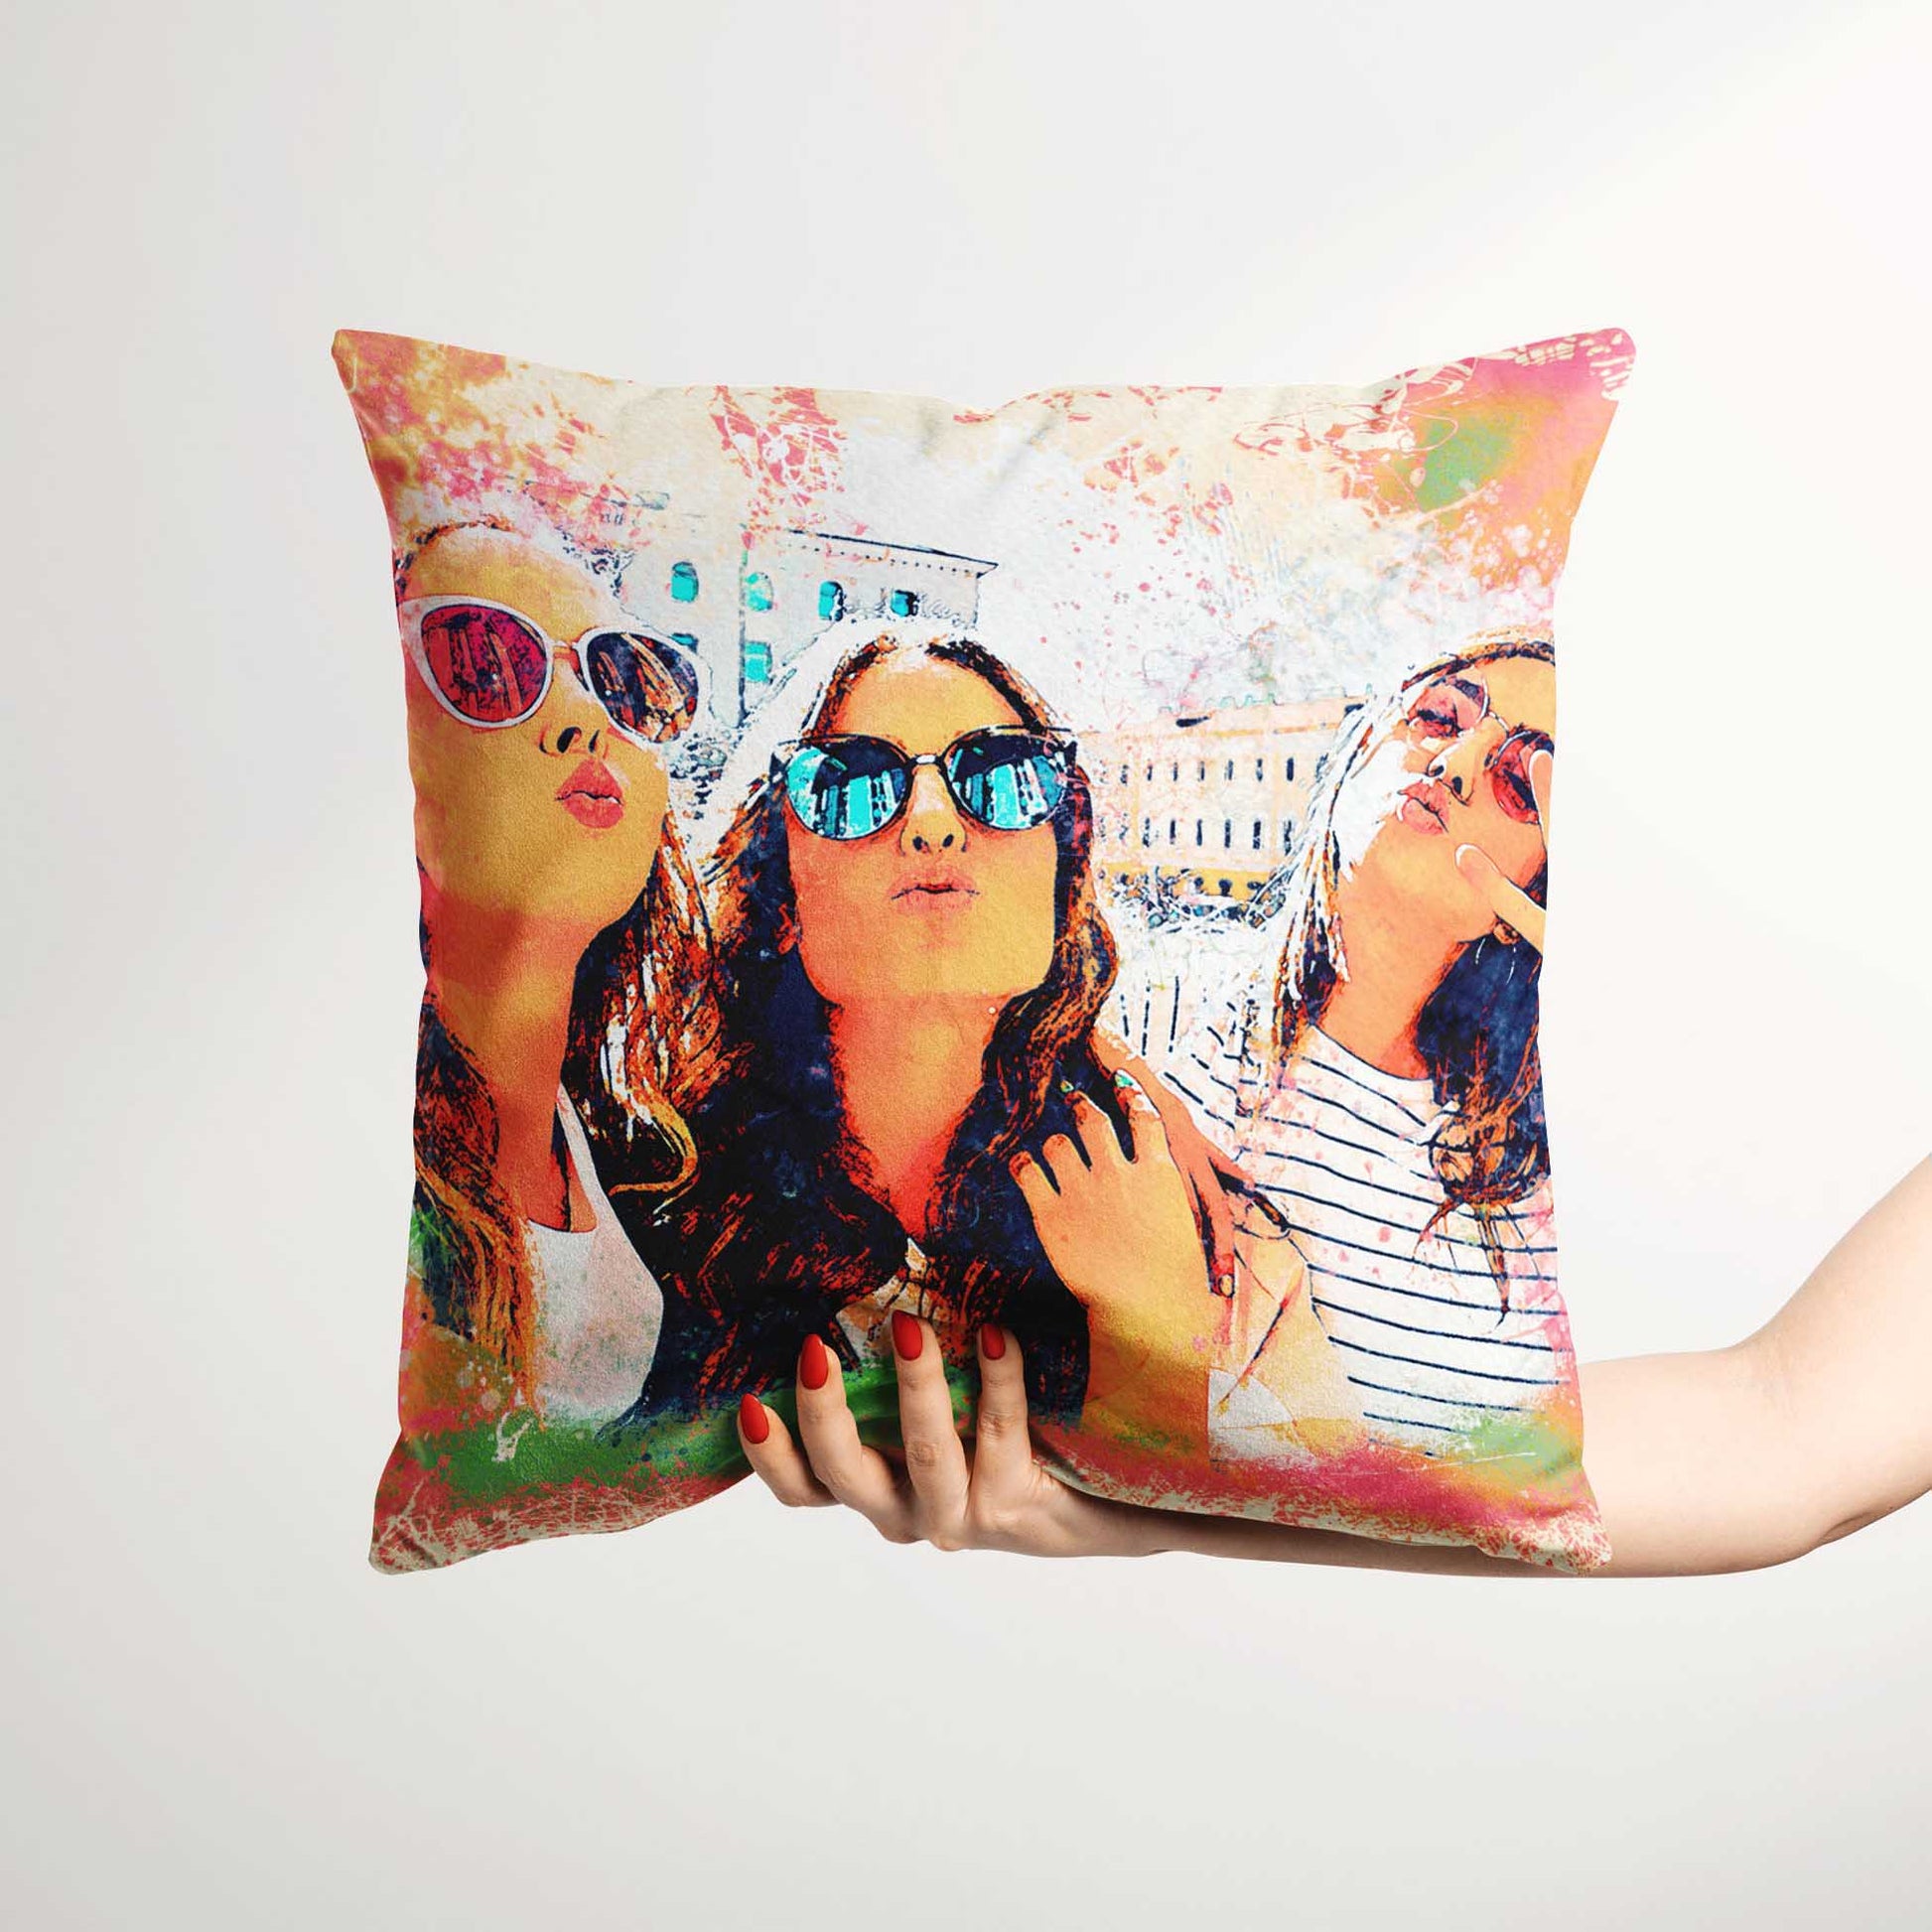 Immerse yourself in a world of colour and creativity with the Personalised Watercolor Splash Cushion. Its cosy and inviting texture provides the perfect spot to relax and unwind. The vibrant and unique watercolor splash design 